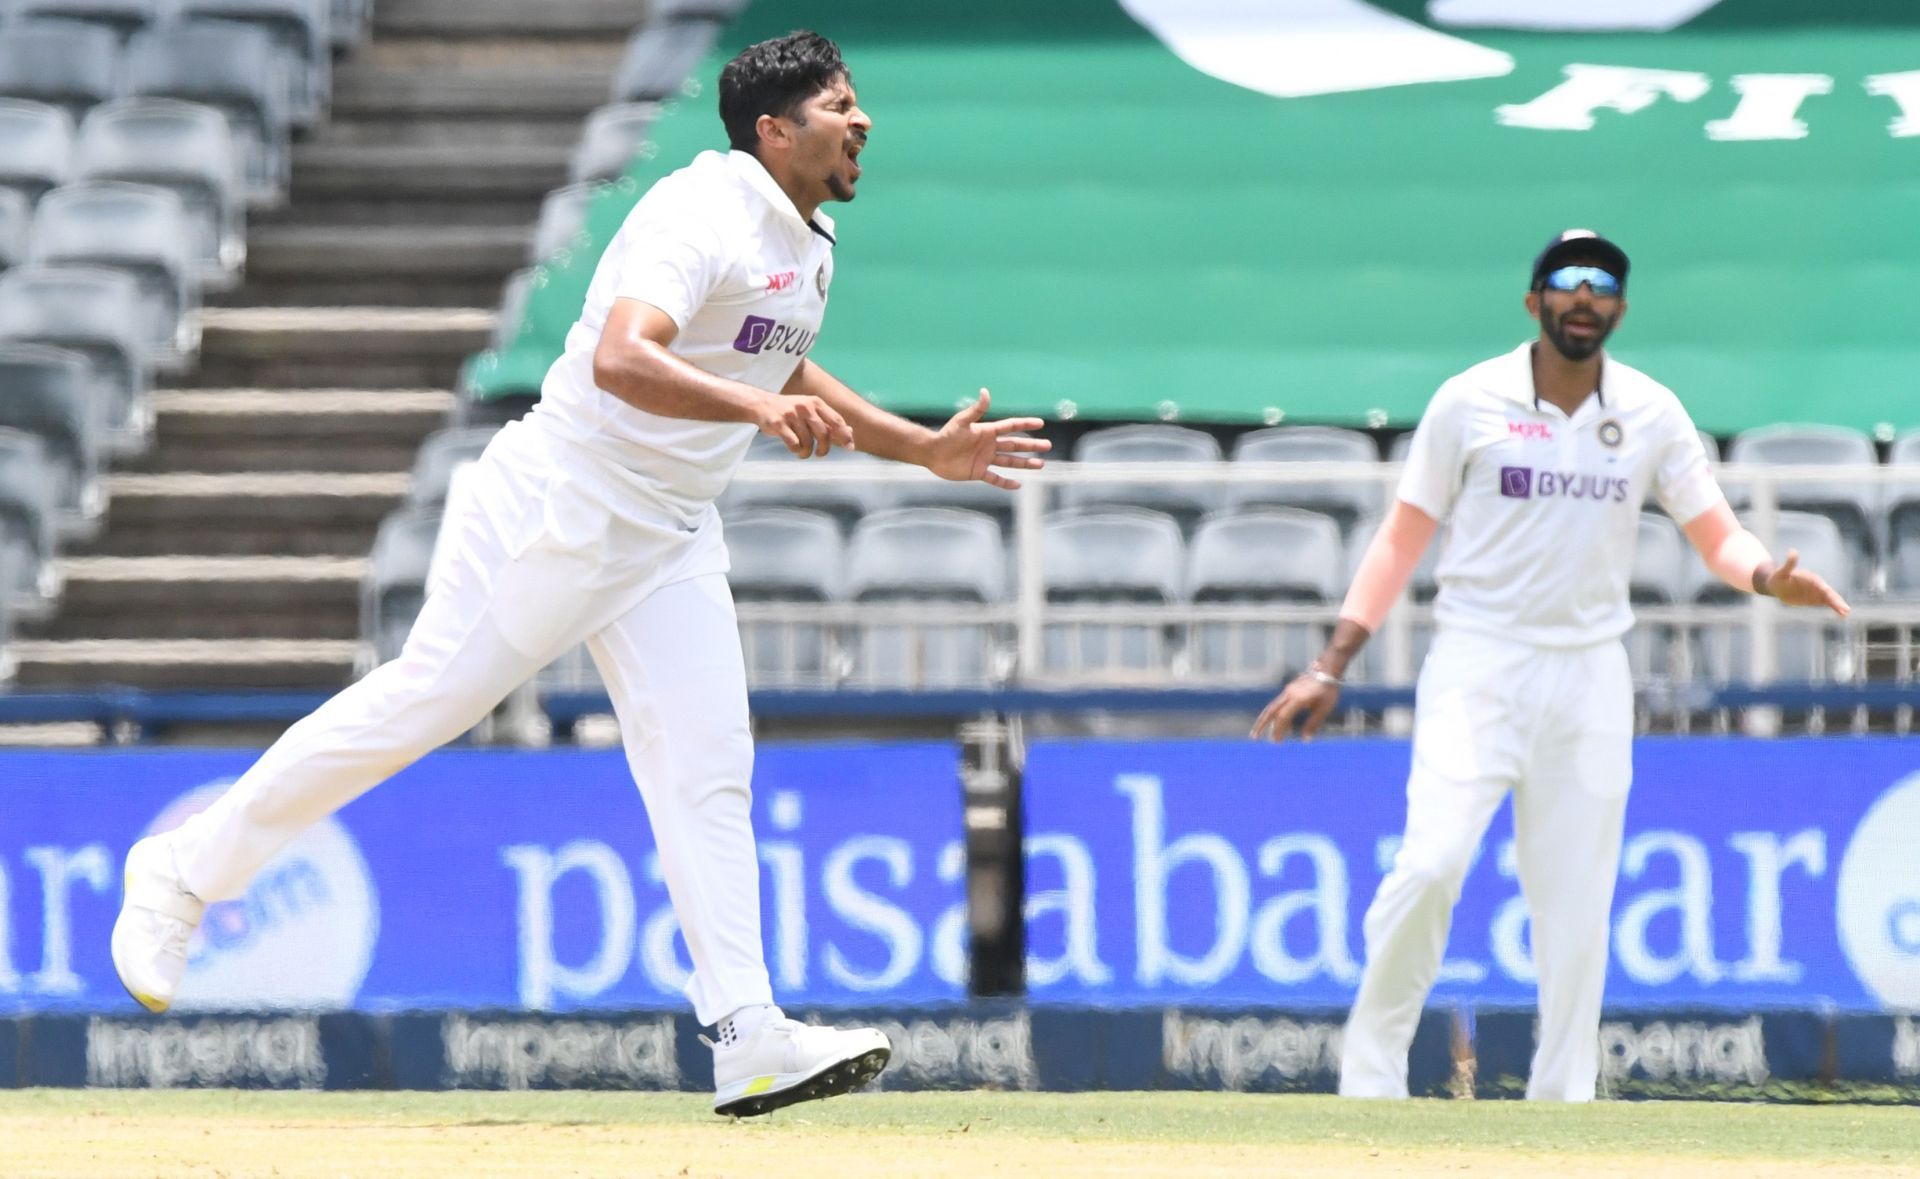 Shardul Thakur has excelled with his all-round skills in the Johannesburg Test